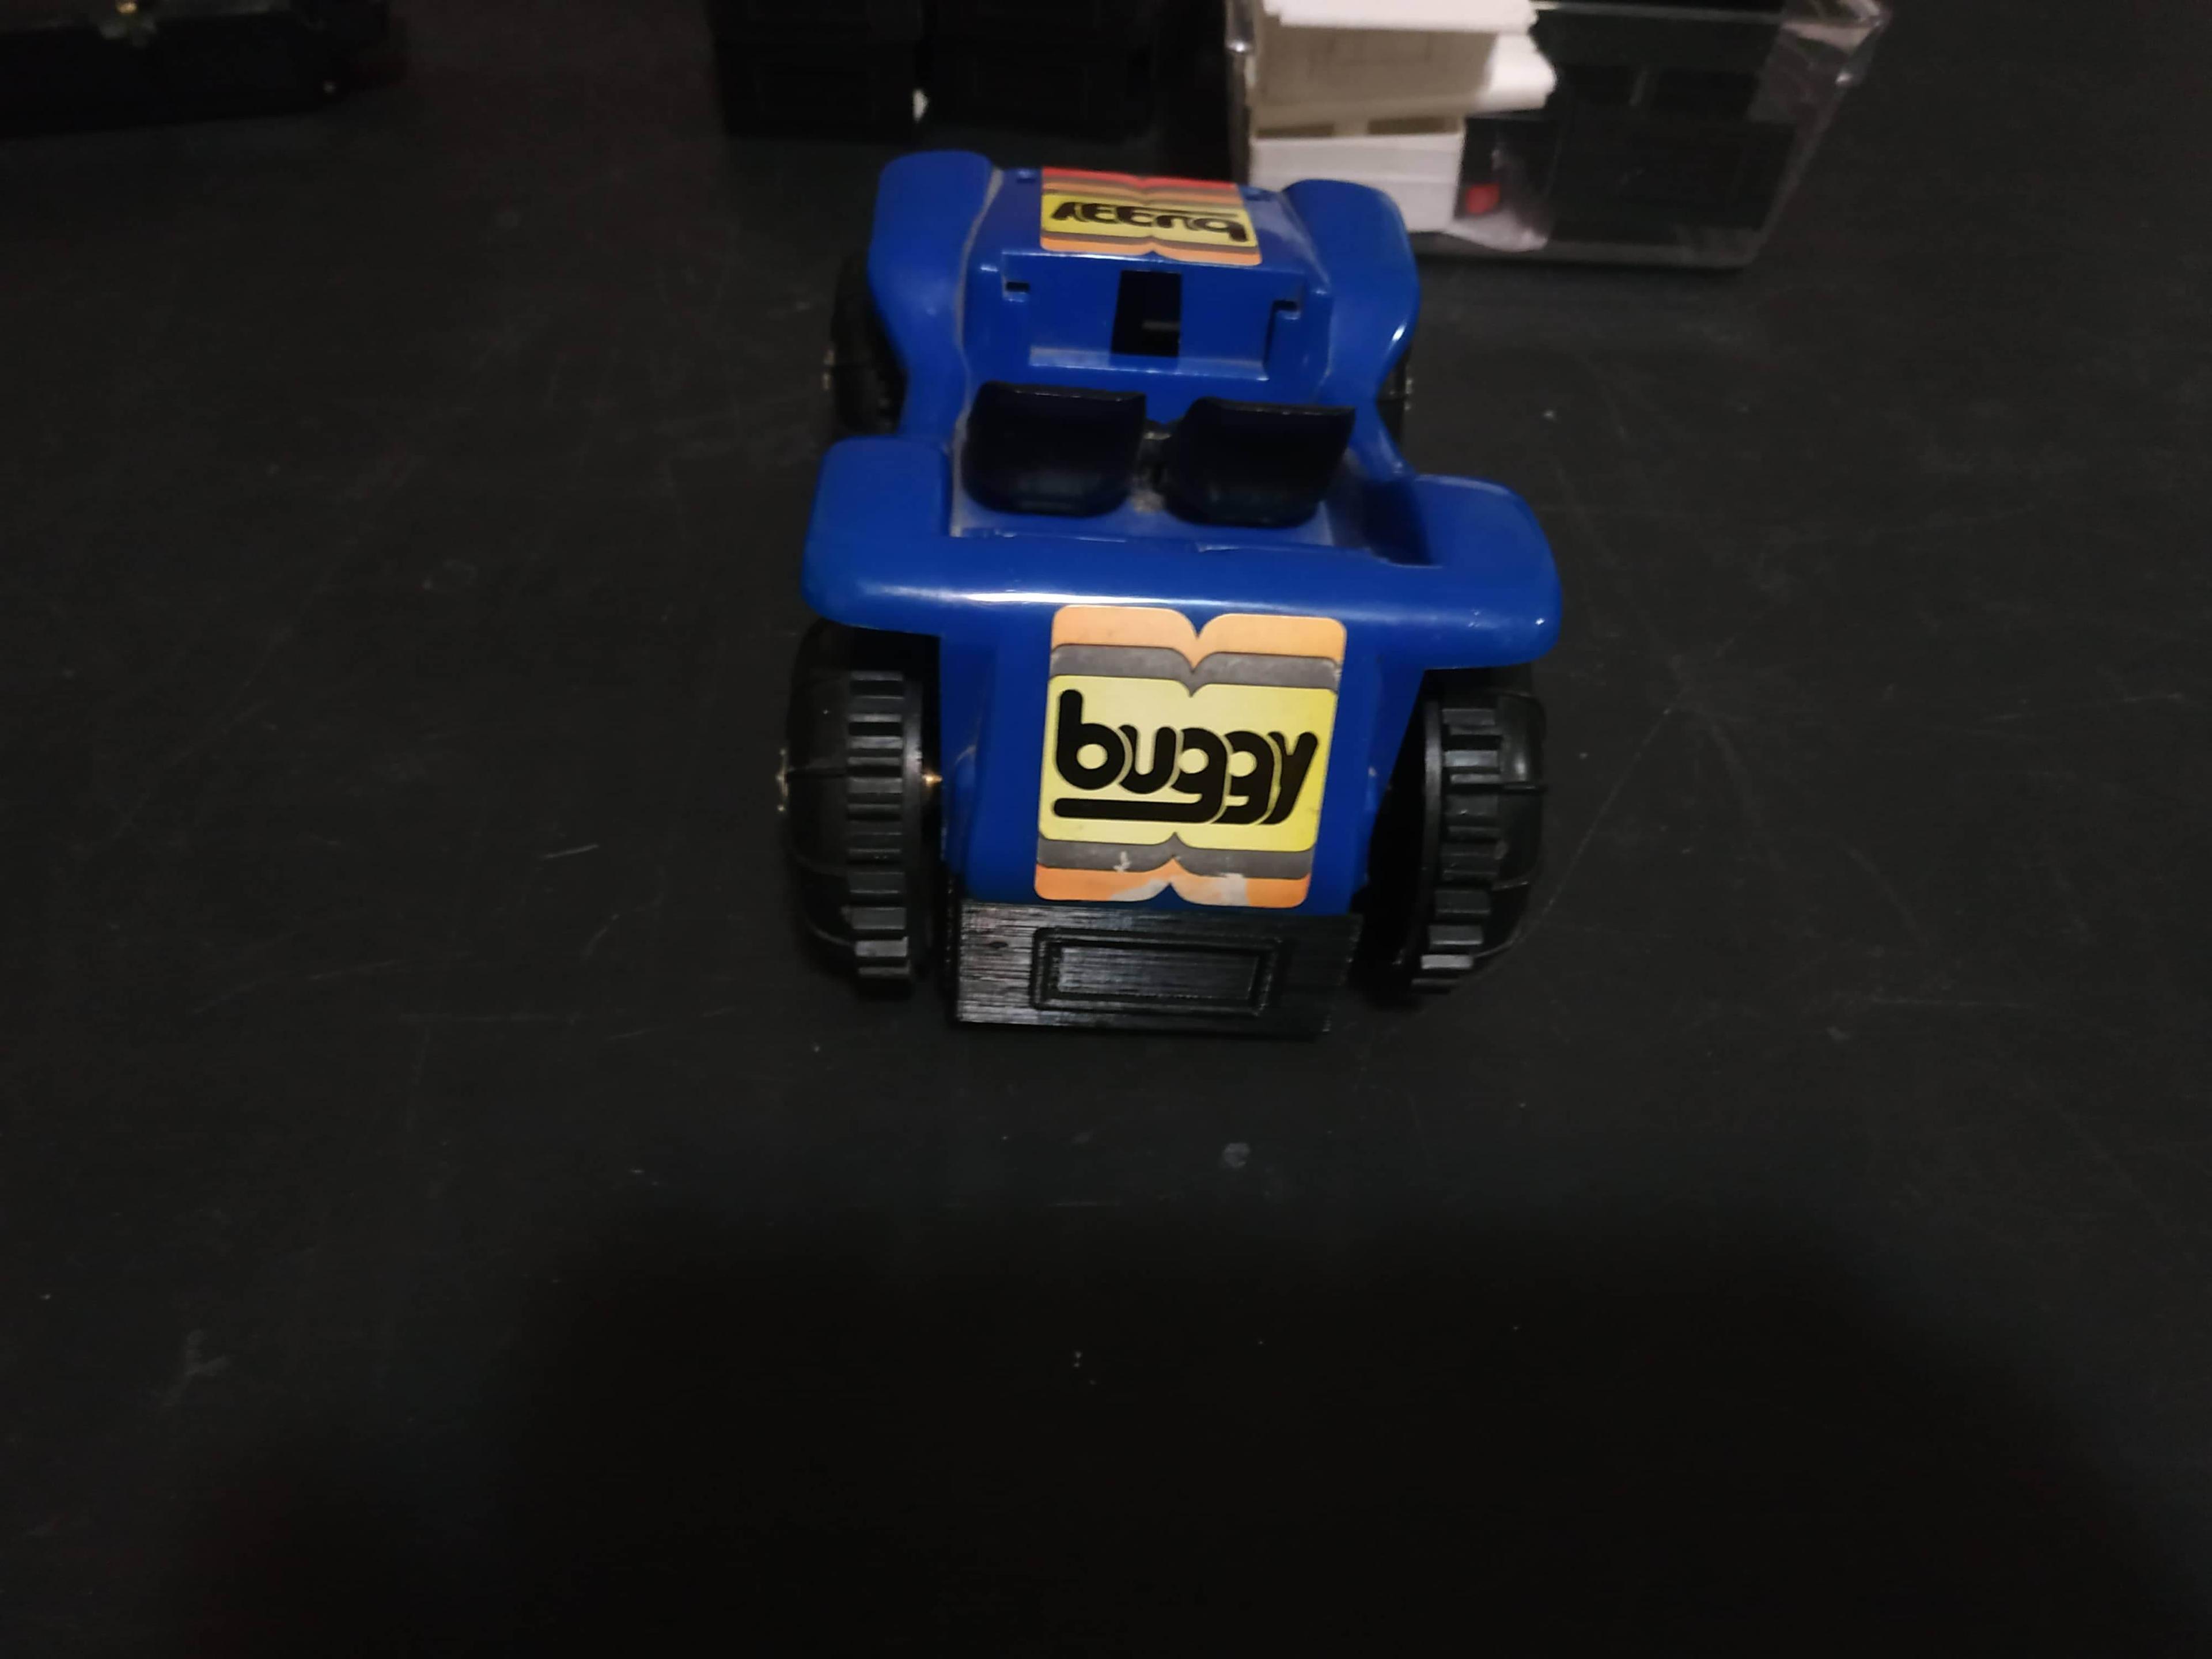 The back of the buggy. Its blue plastic top has a yellow and orange sticker that says 'buggy' on it. Below the top is the black 3D-printed base, with a shape that looks like a license plate